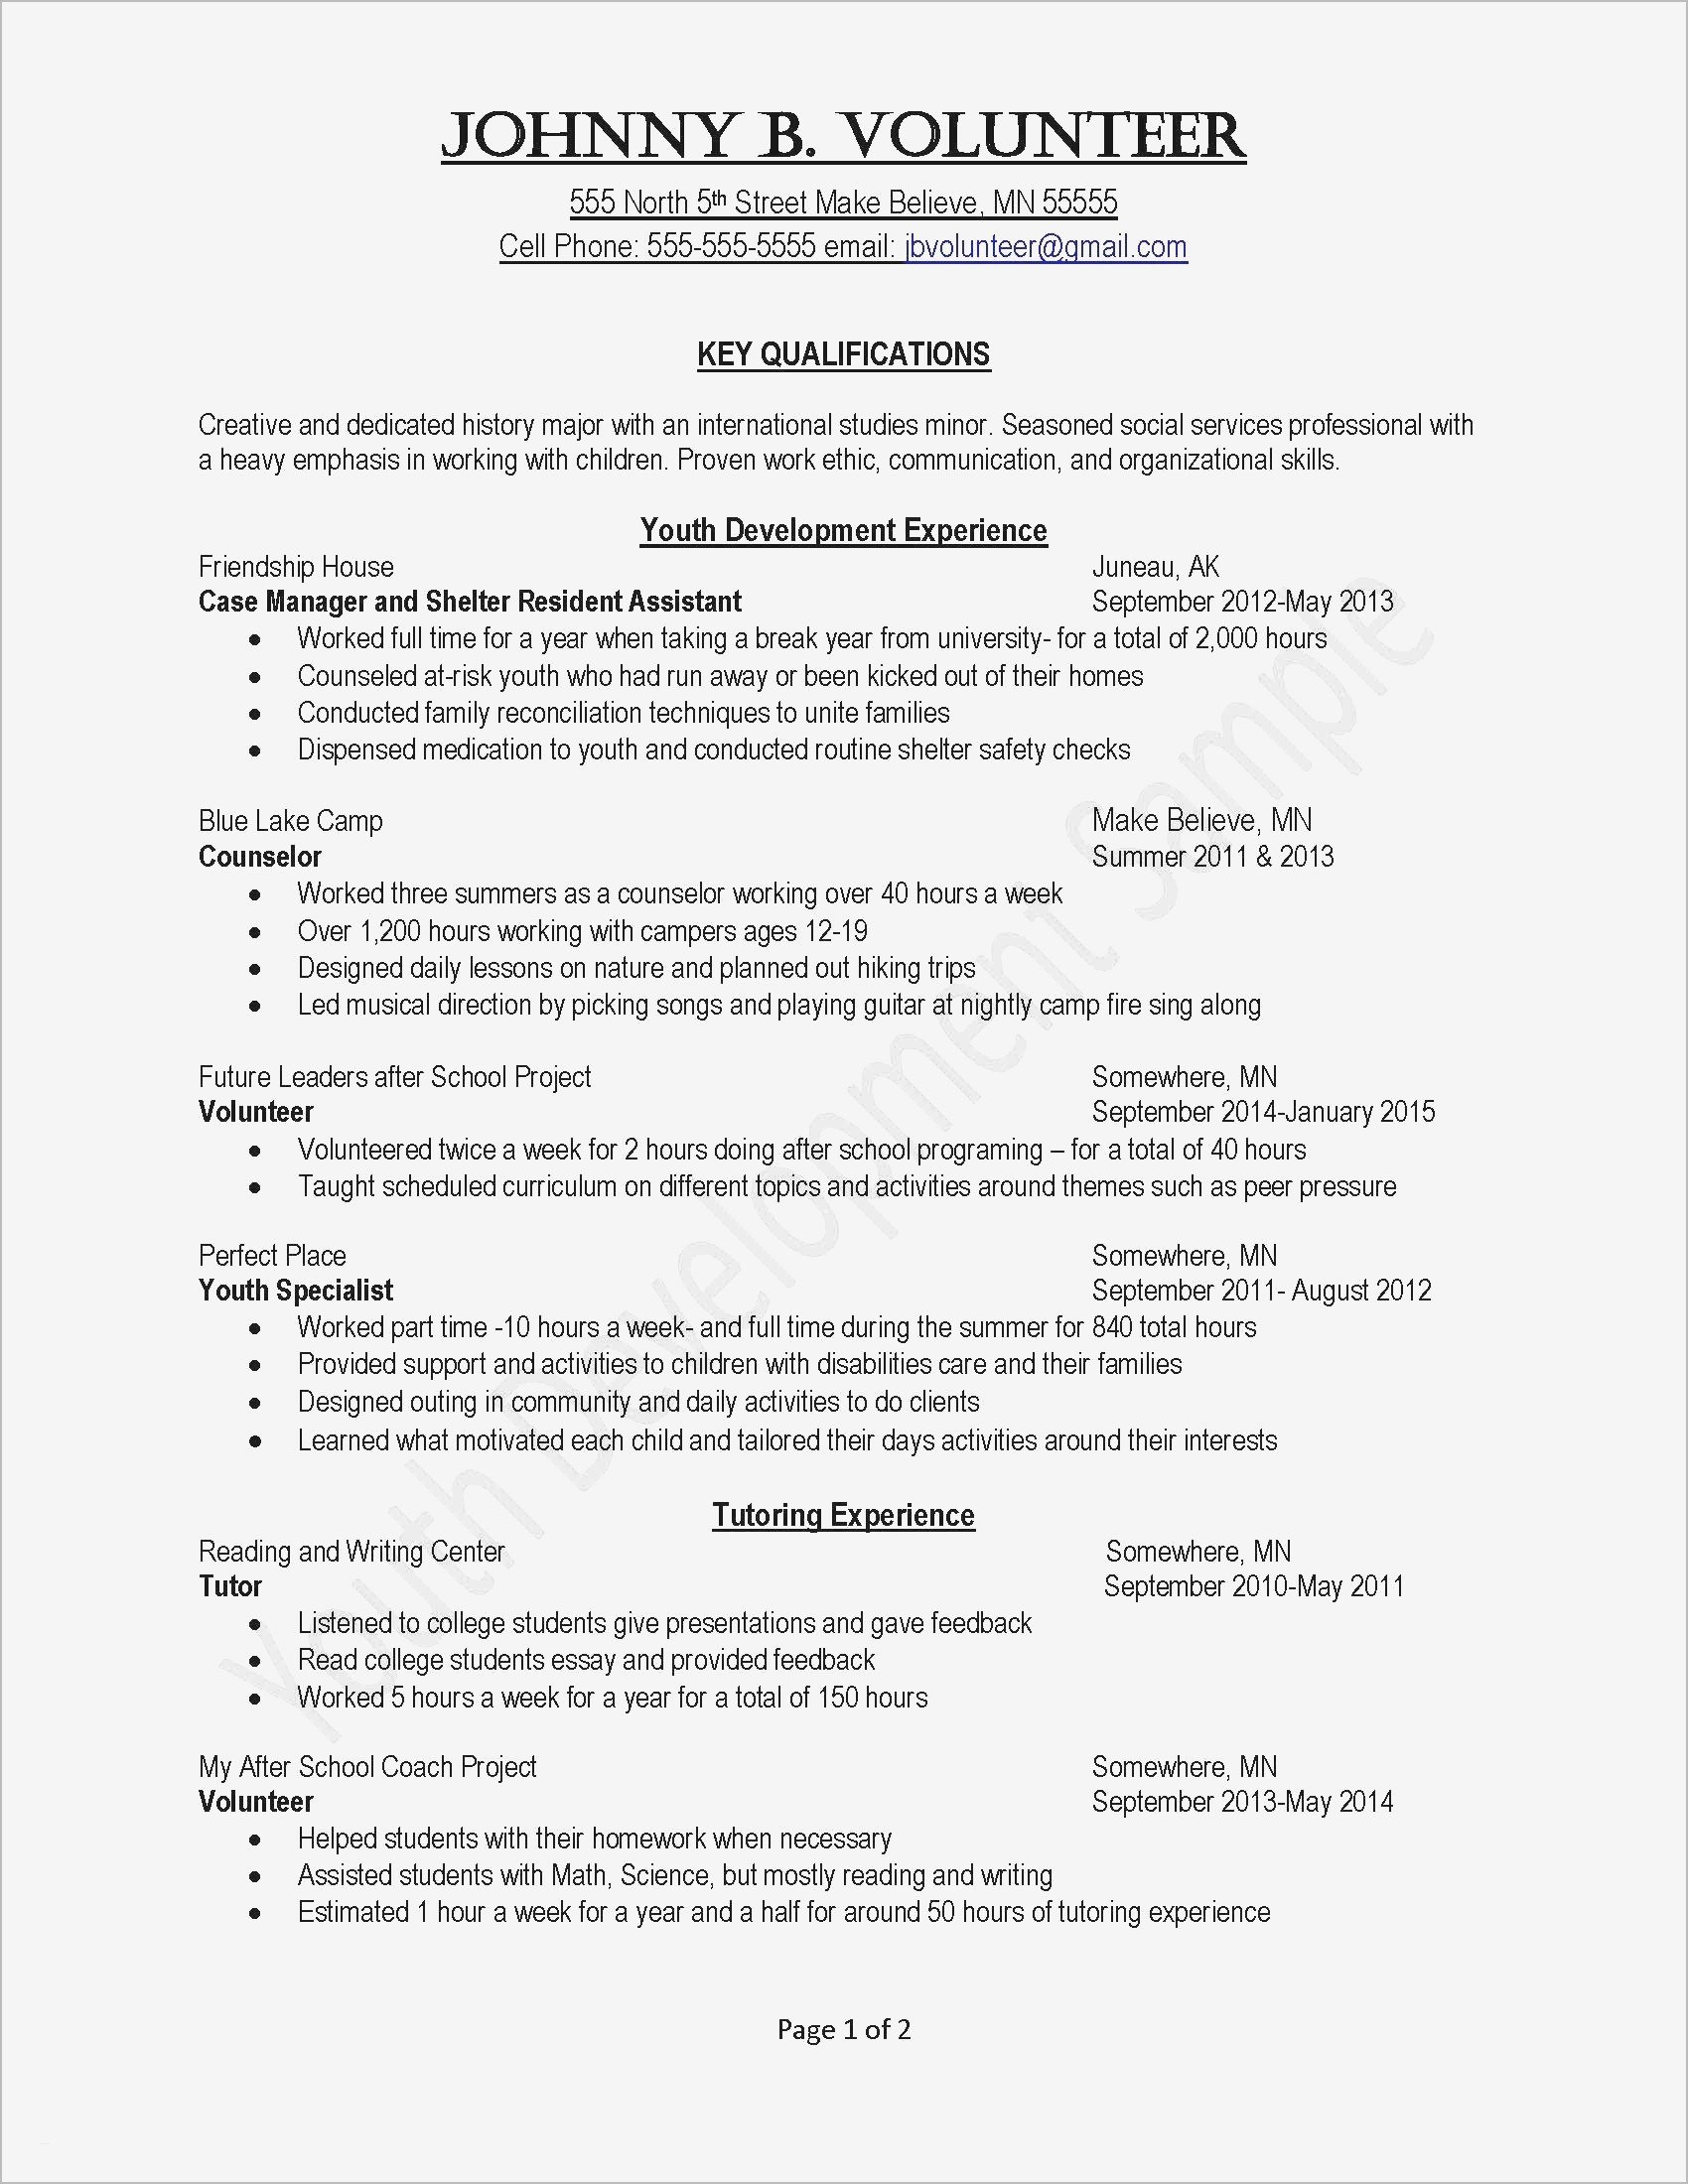 free job offer letter template Collection-Job fer Letter Template Us Copy Od Consultant Cover Letter Fungram New 21 Resume Templates for 17-t